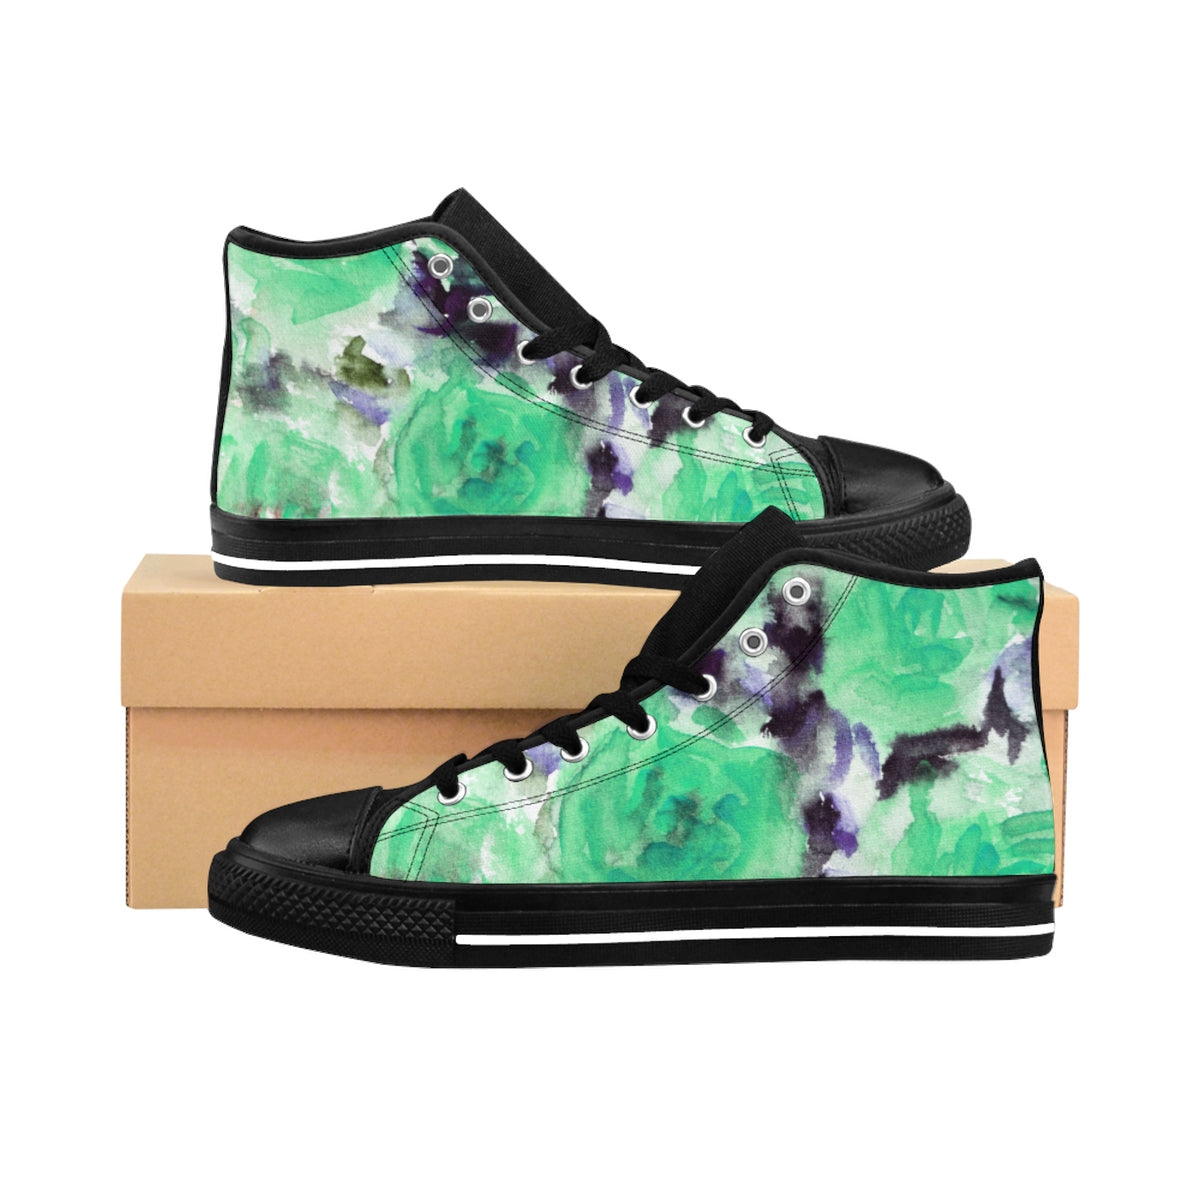 Blue Rose Floral Print Women's High Top Designer Sneakers Tennis Shoes (US Size: 6-12)-Women's High Top Sneakers-US 10-Heidi Kimura Art LLC Blue Rose Floral Women's Sneakers, Blue Rose Floral Print Women's High Top Designer Sneakers Tennis Shoes(US Size: 6-12)